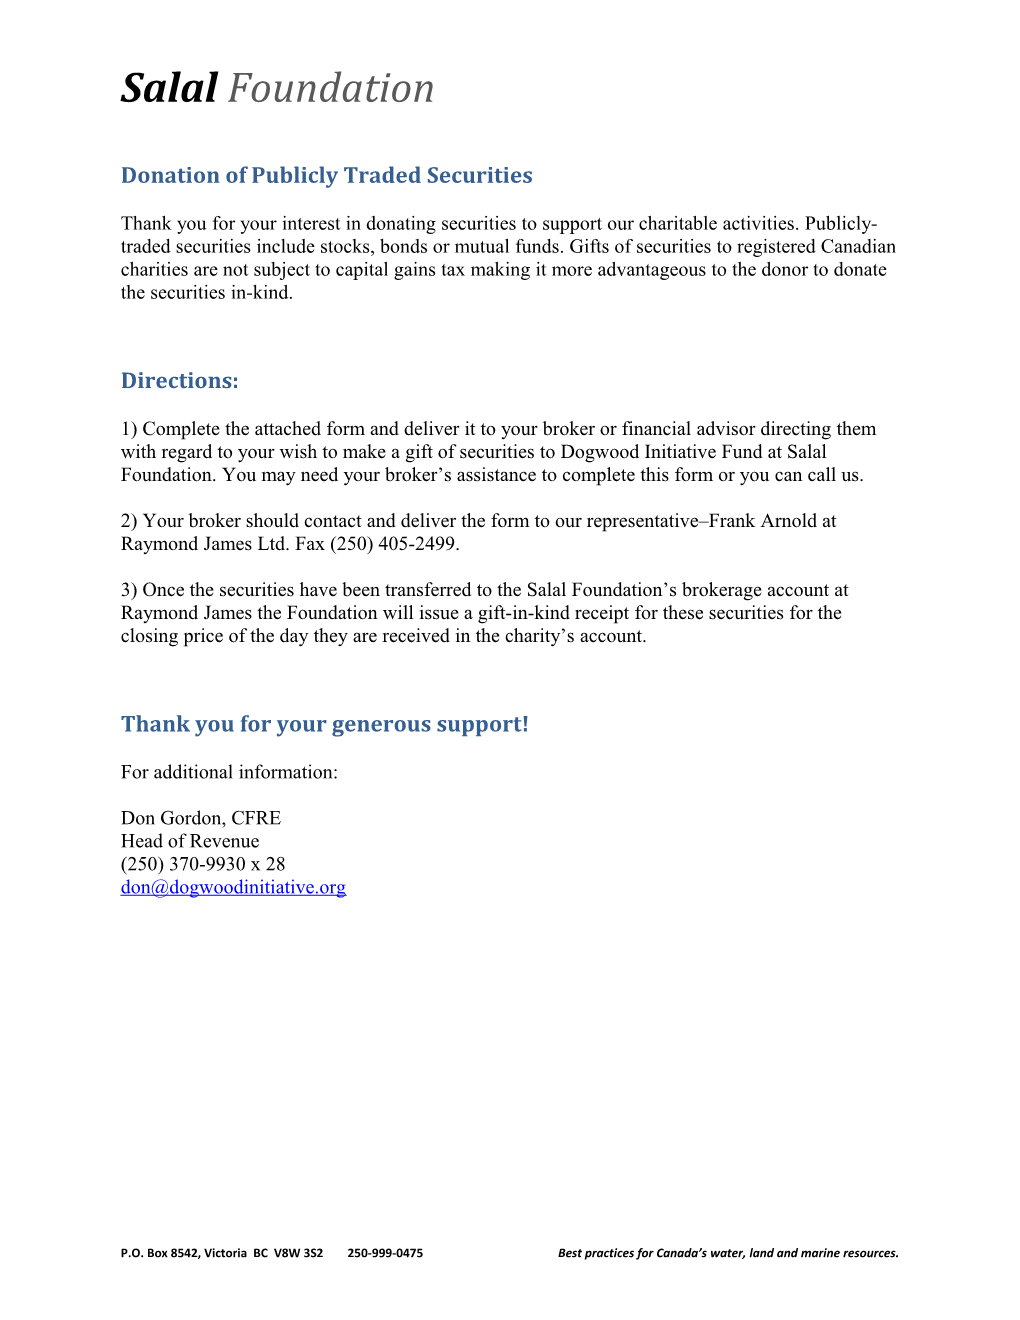 Donation of Publicly Traded Securities